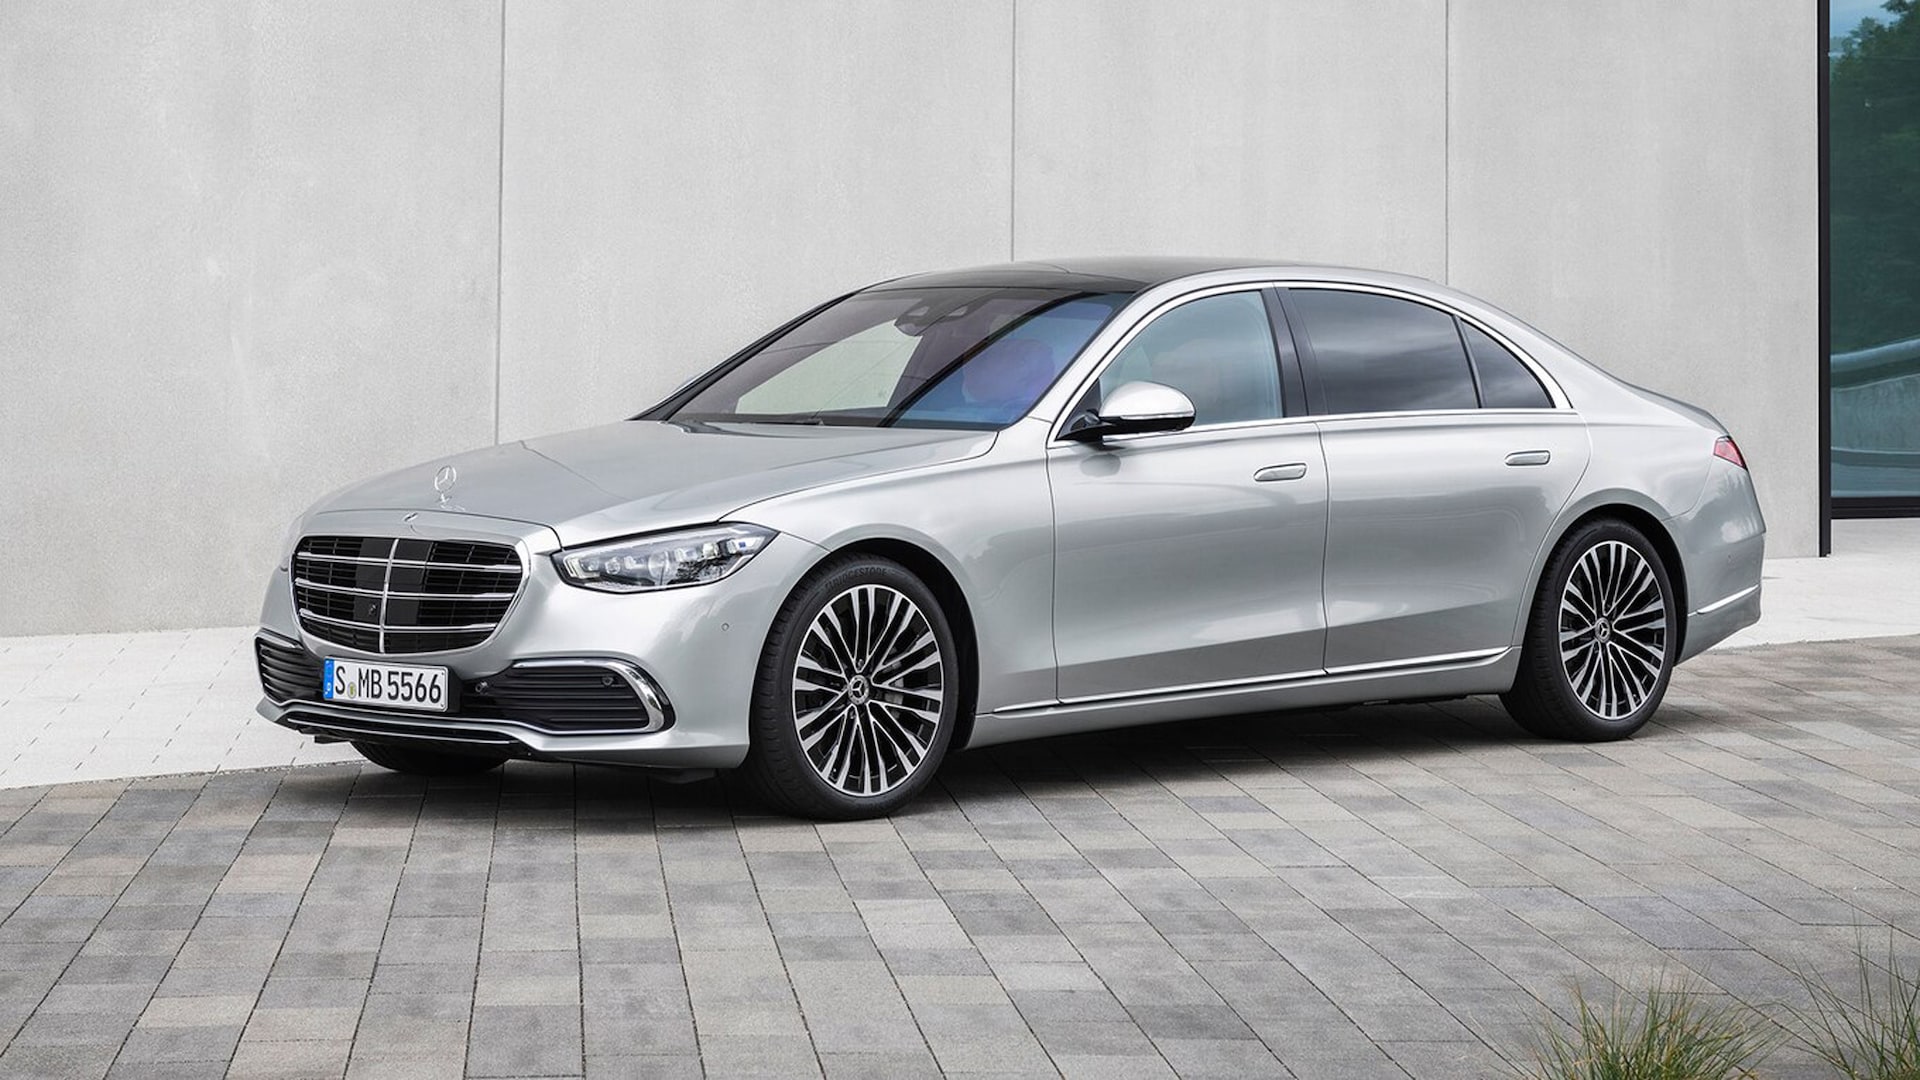 2022 Mercedes-Benz S-Class Prices, Reviews, and Photos - MotorTrend